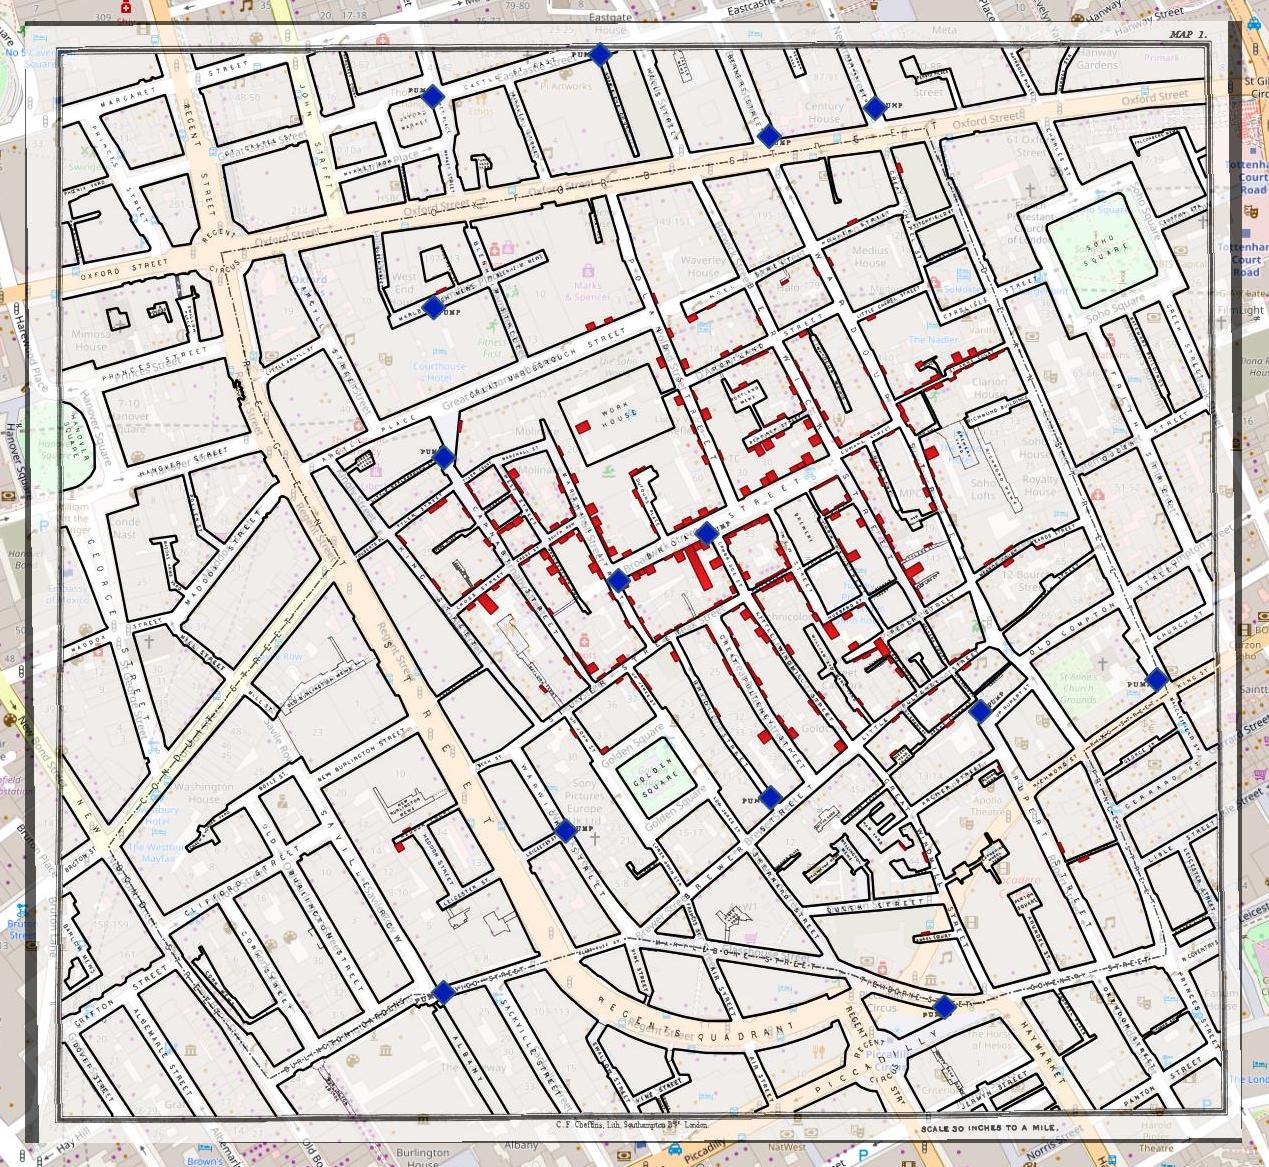 Ghost map street map, from OpenStreetMap